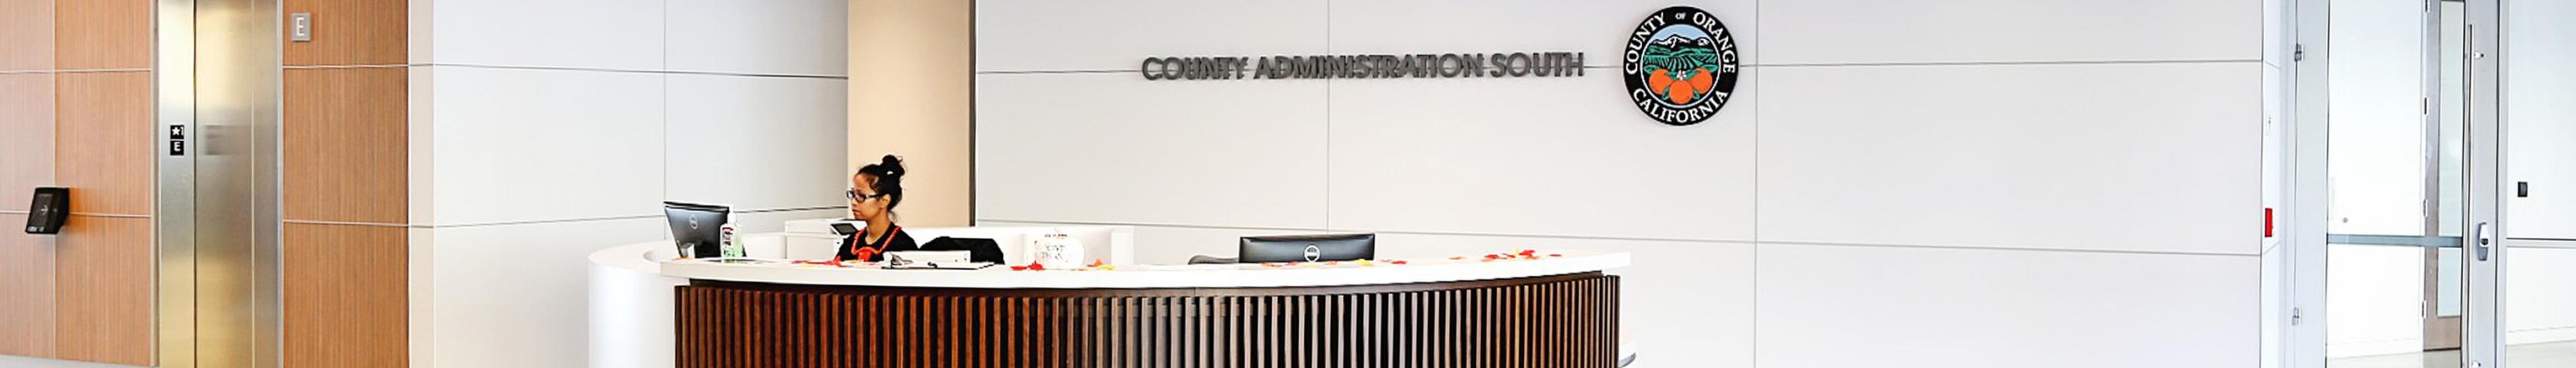 County Administration South Reception Desk